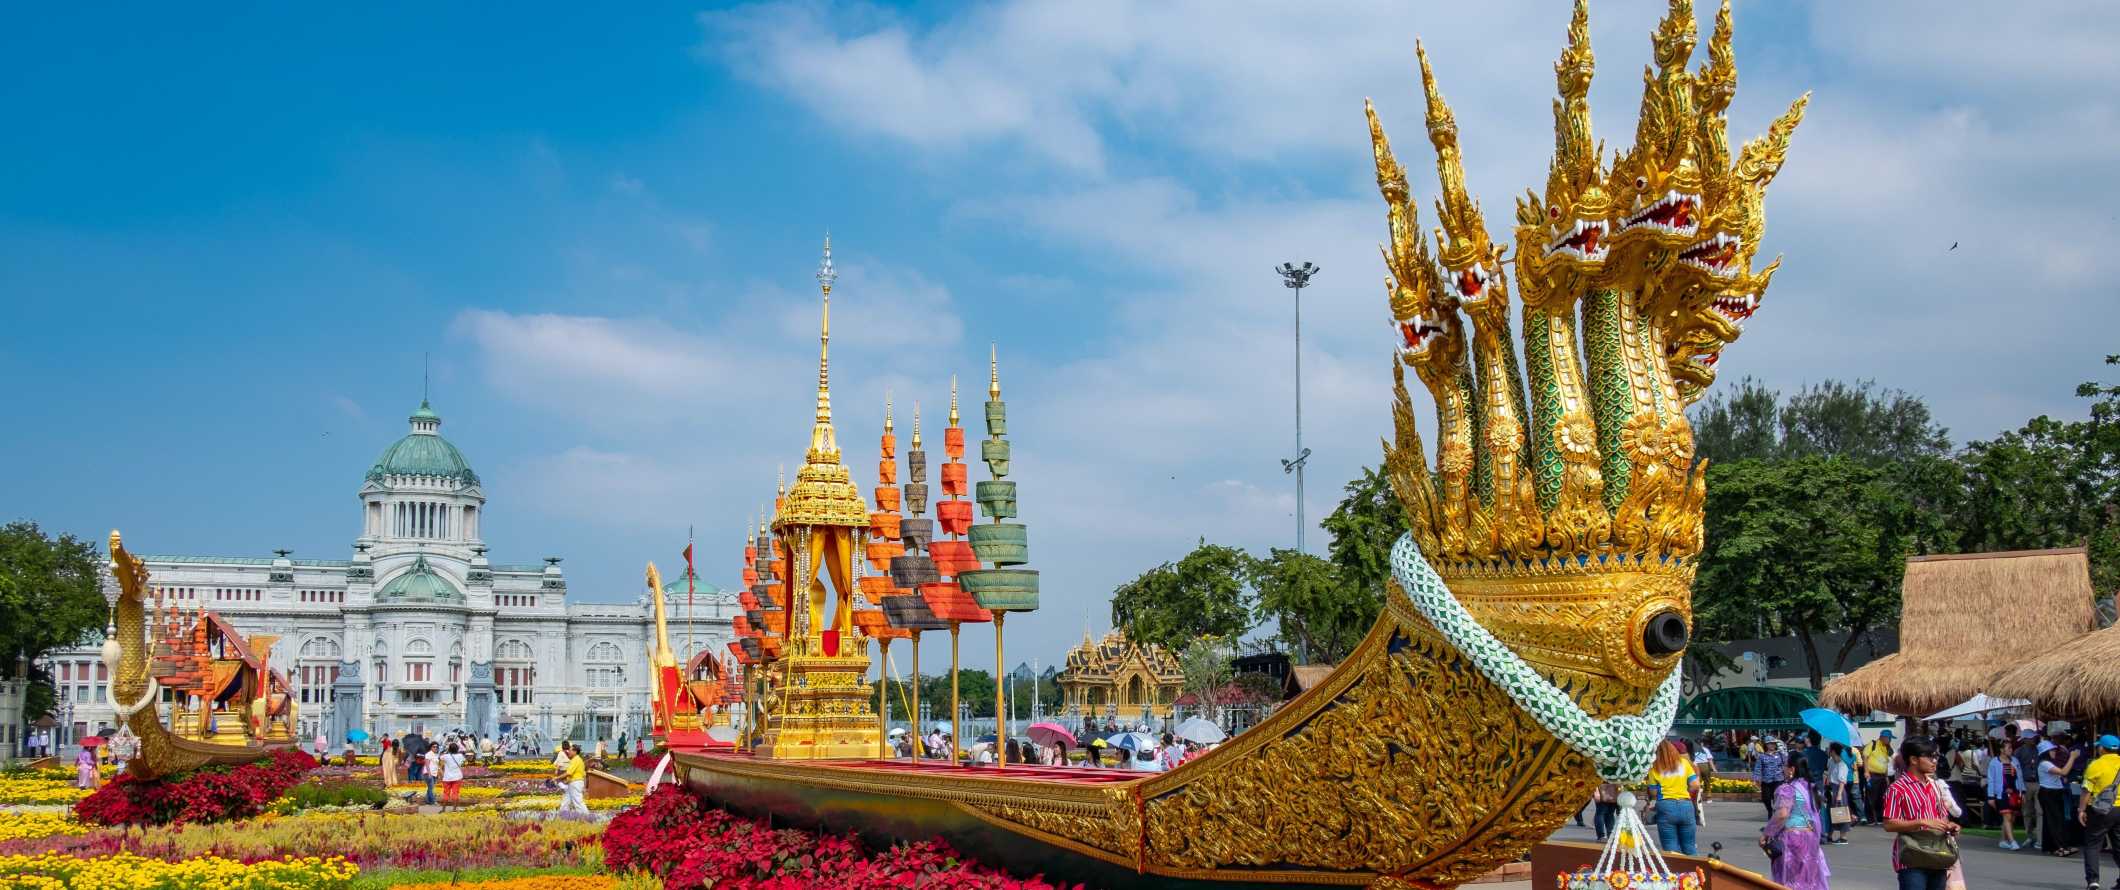 A large, long golden barge with many dragon heads sits on a bright flower bed in front of the Royal Barge Museum in Bangkok, Thailand